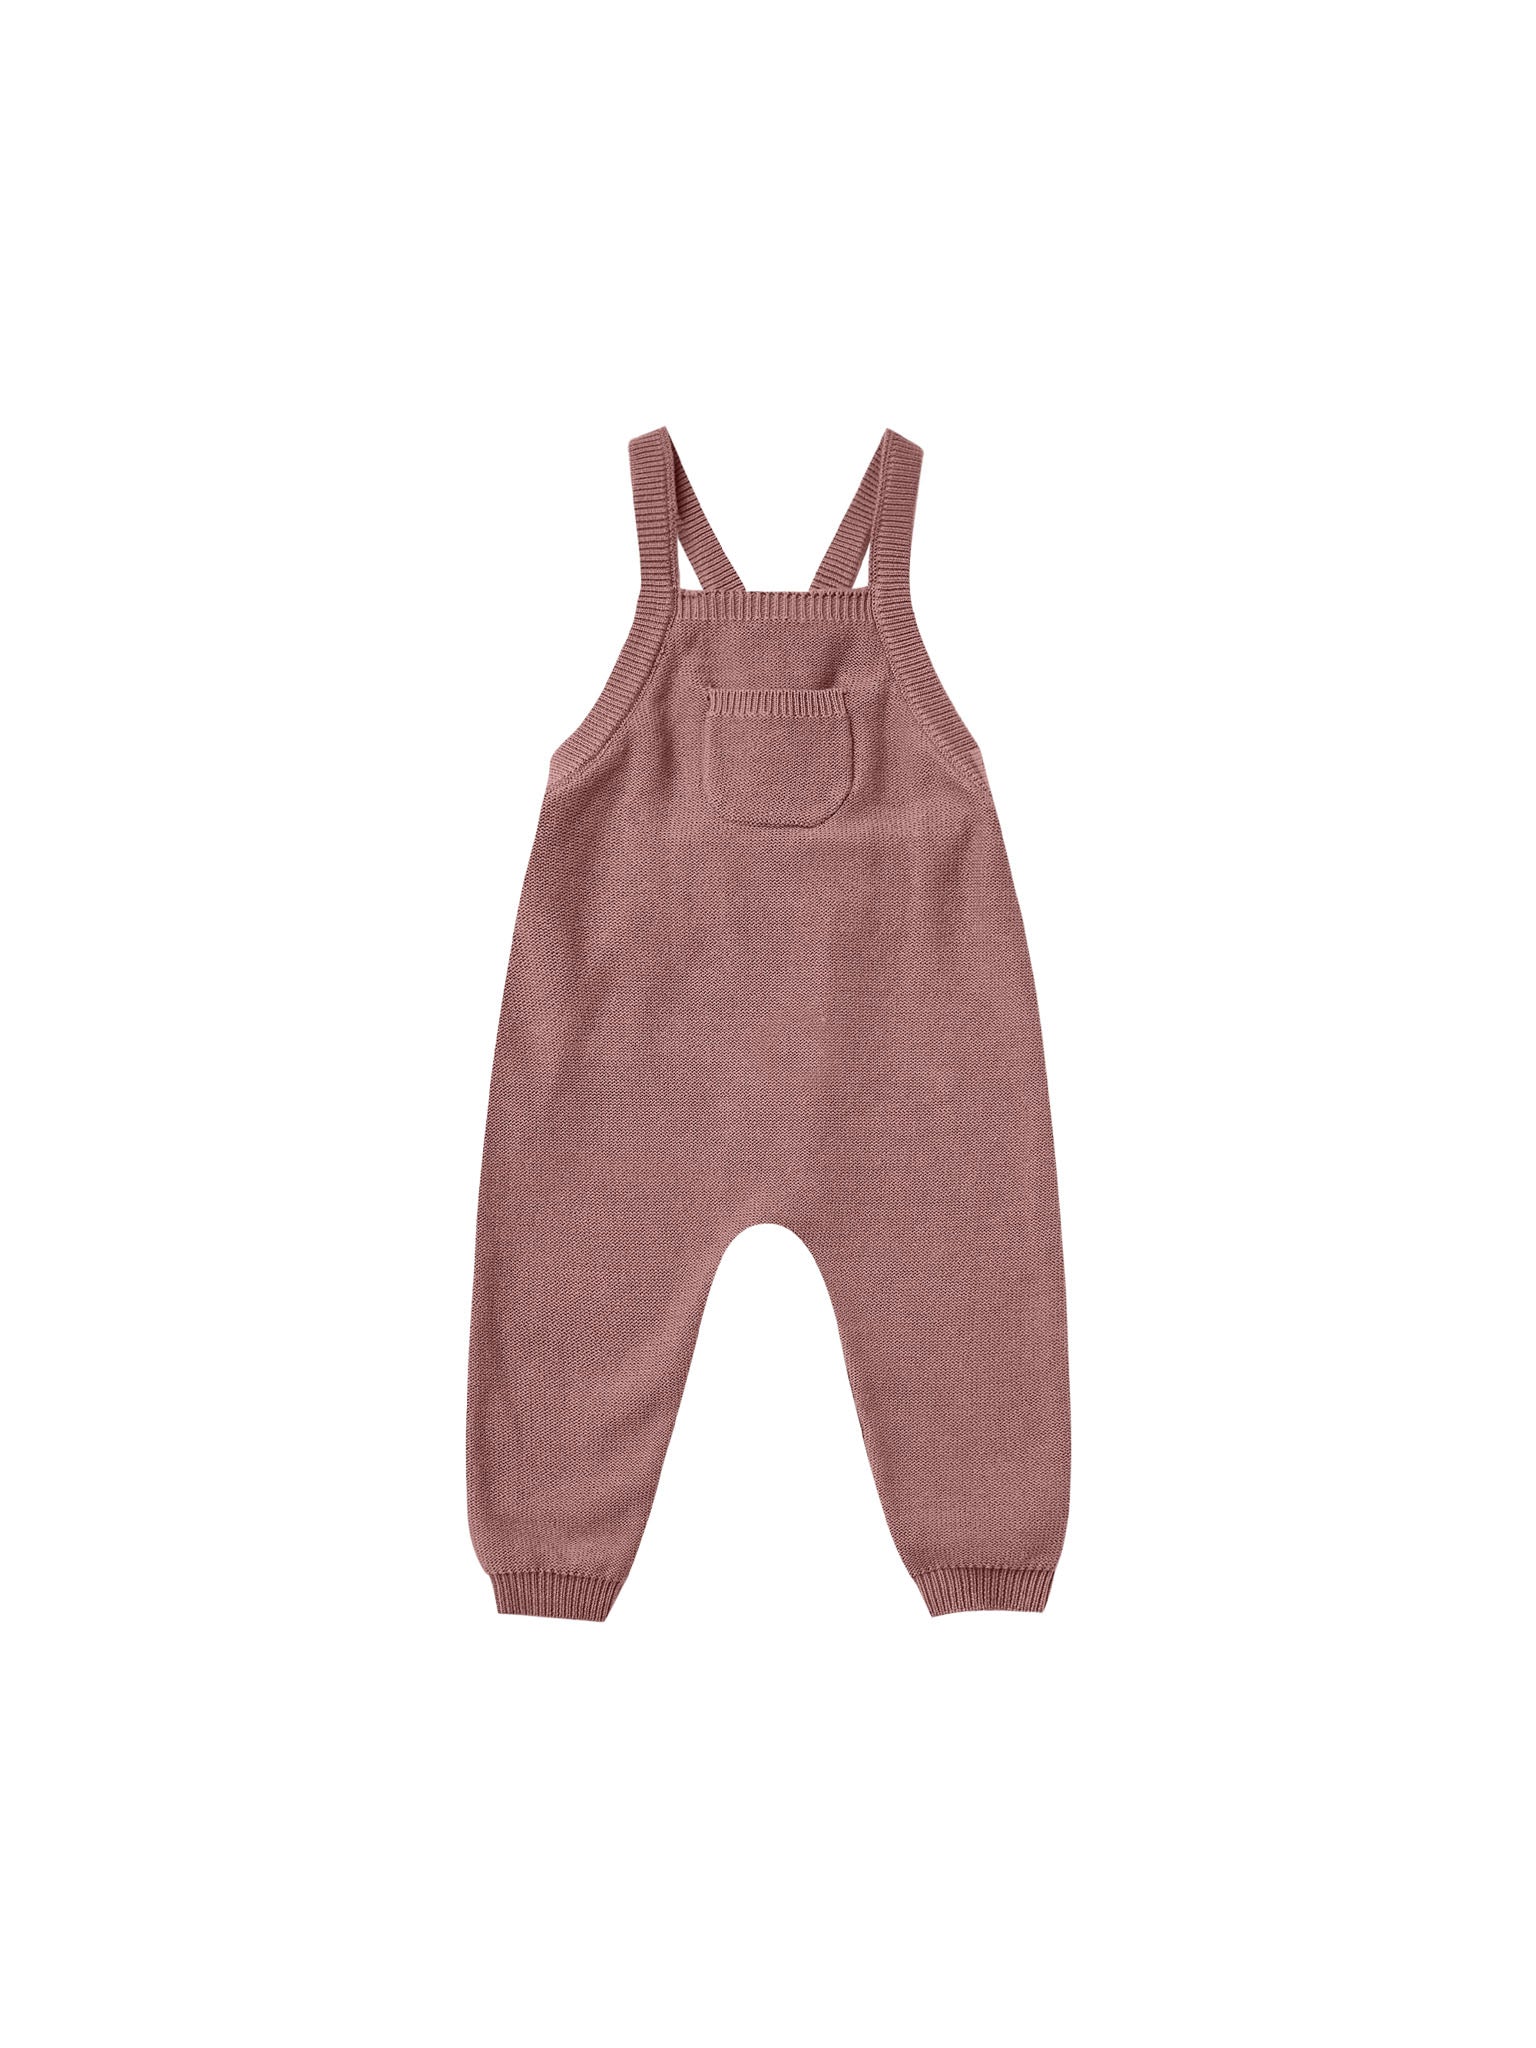 Quincy Mae Knit Overall - Fig